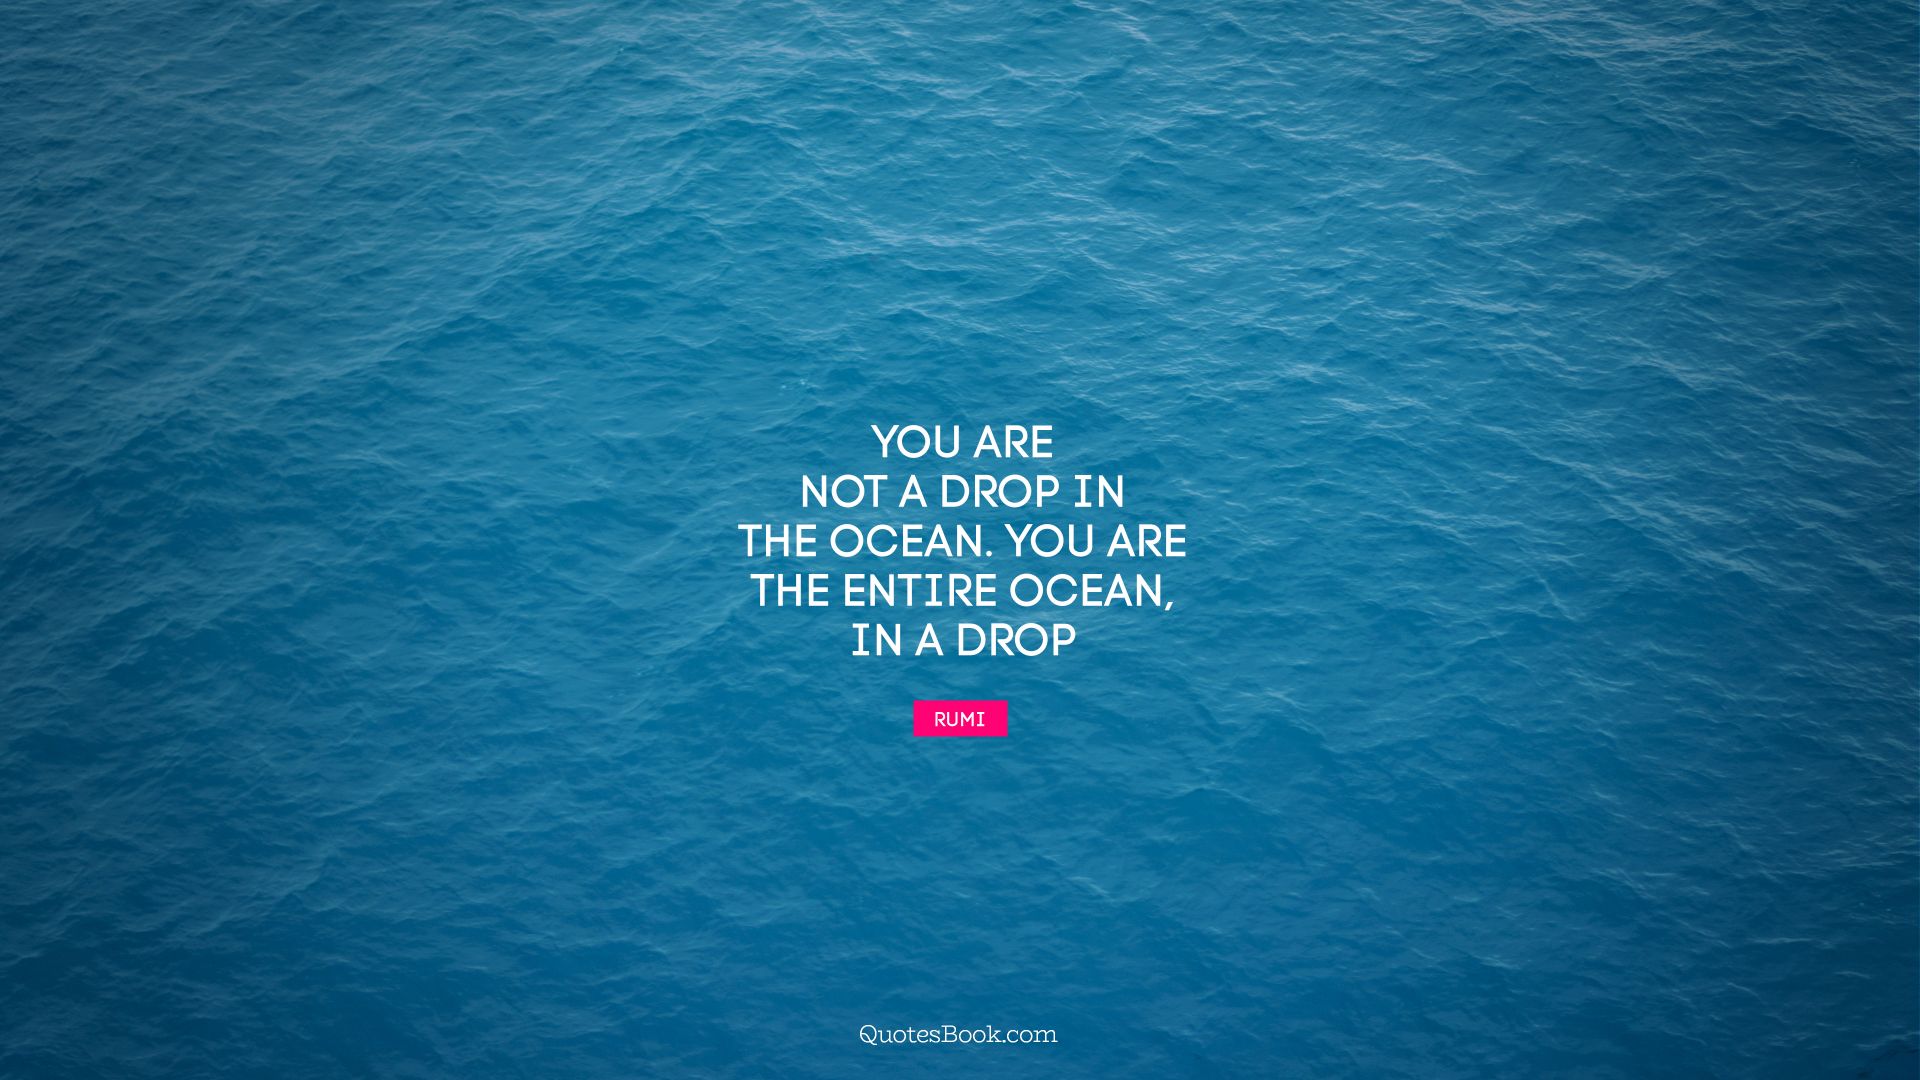 You are not a drop in the ocean. You are the entire ocean, in a drop. - Quote by Rumi